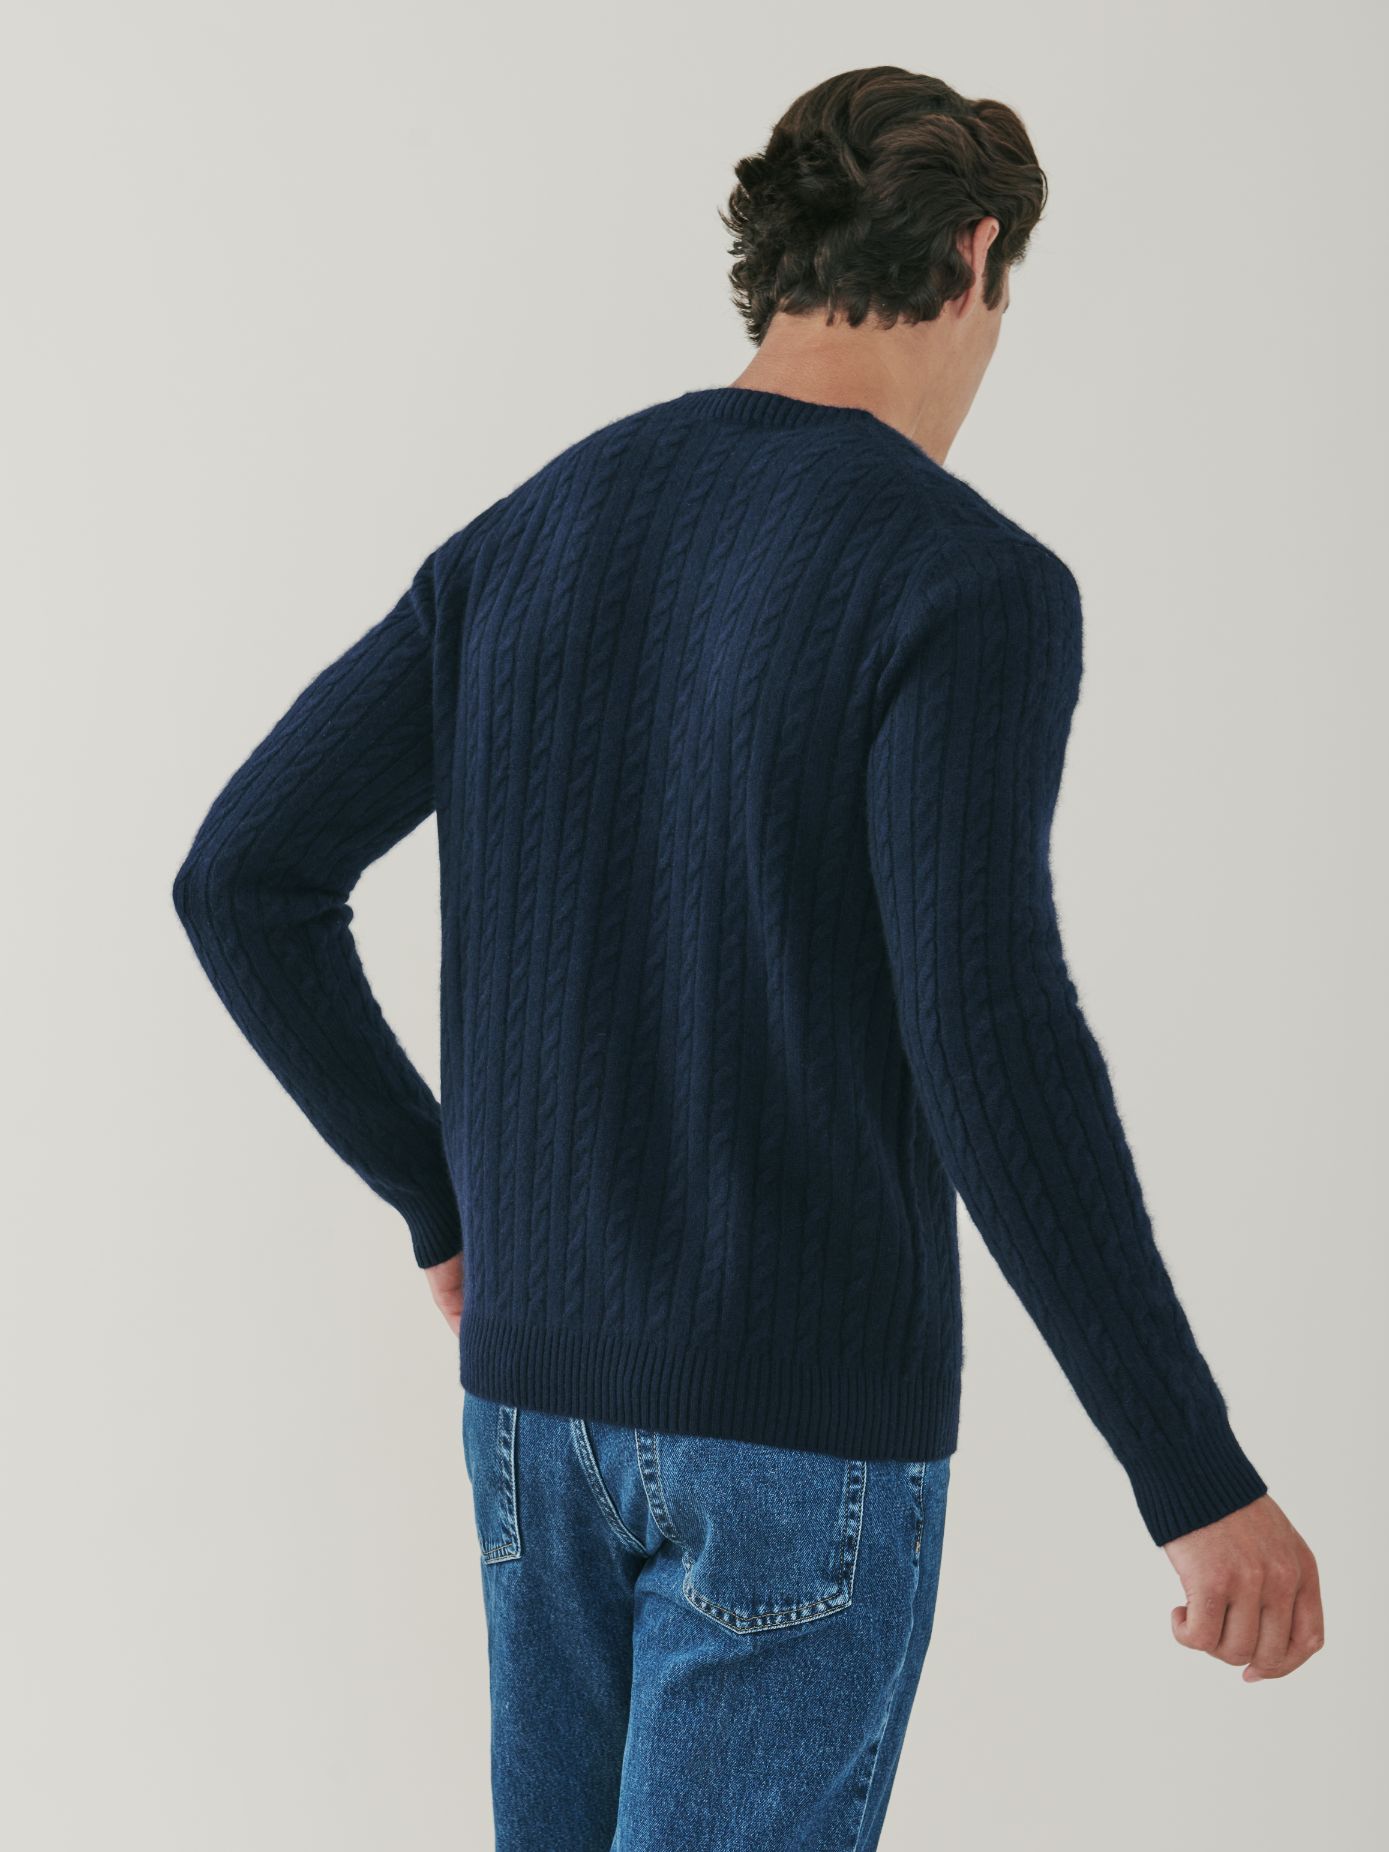 Afton | Men's Cable Knit Cashmere Crew Neck Sweater in Navy